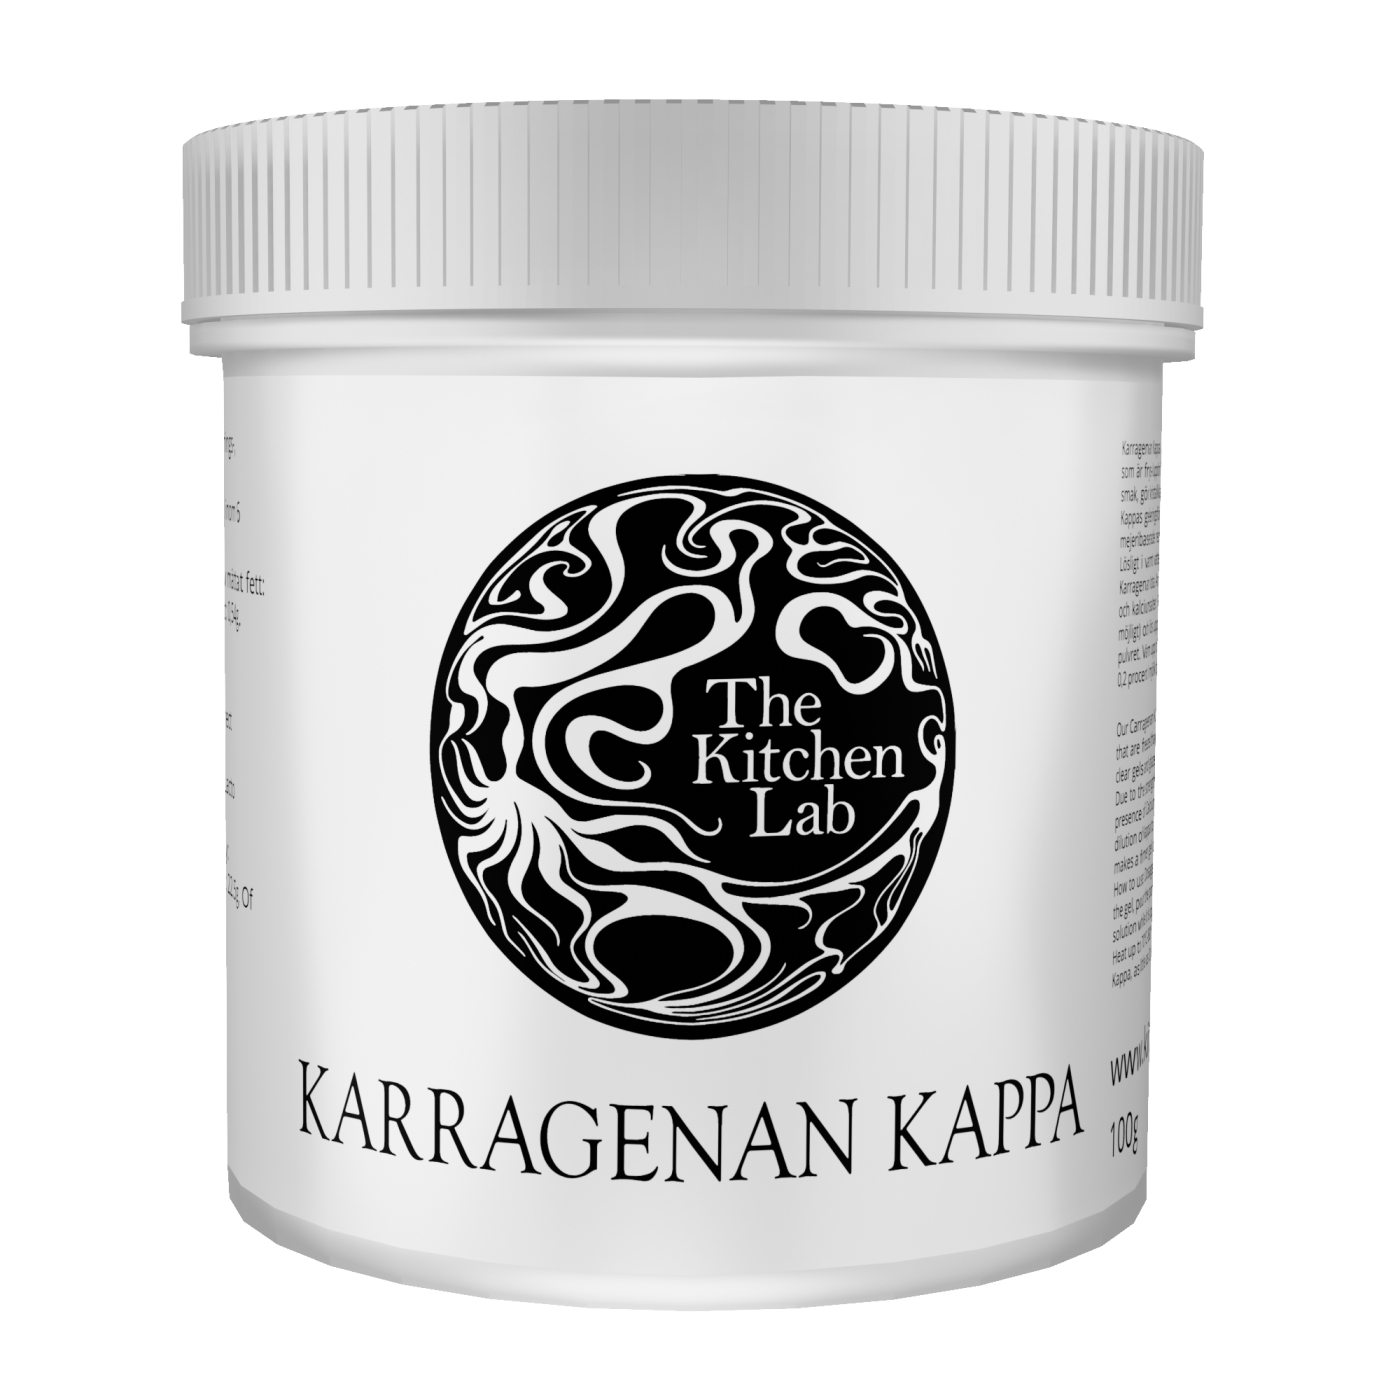 e407 Kappa Carrageenan in Ice Cream - Auxiliary but Essential